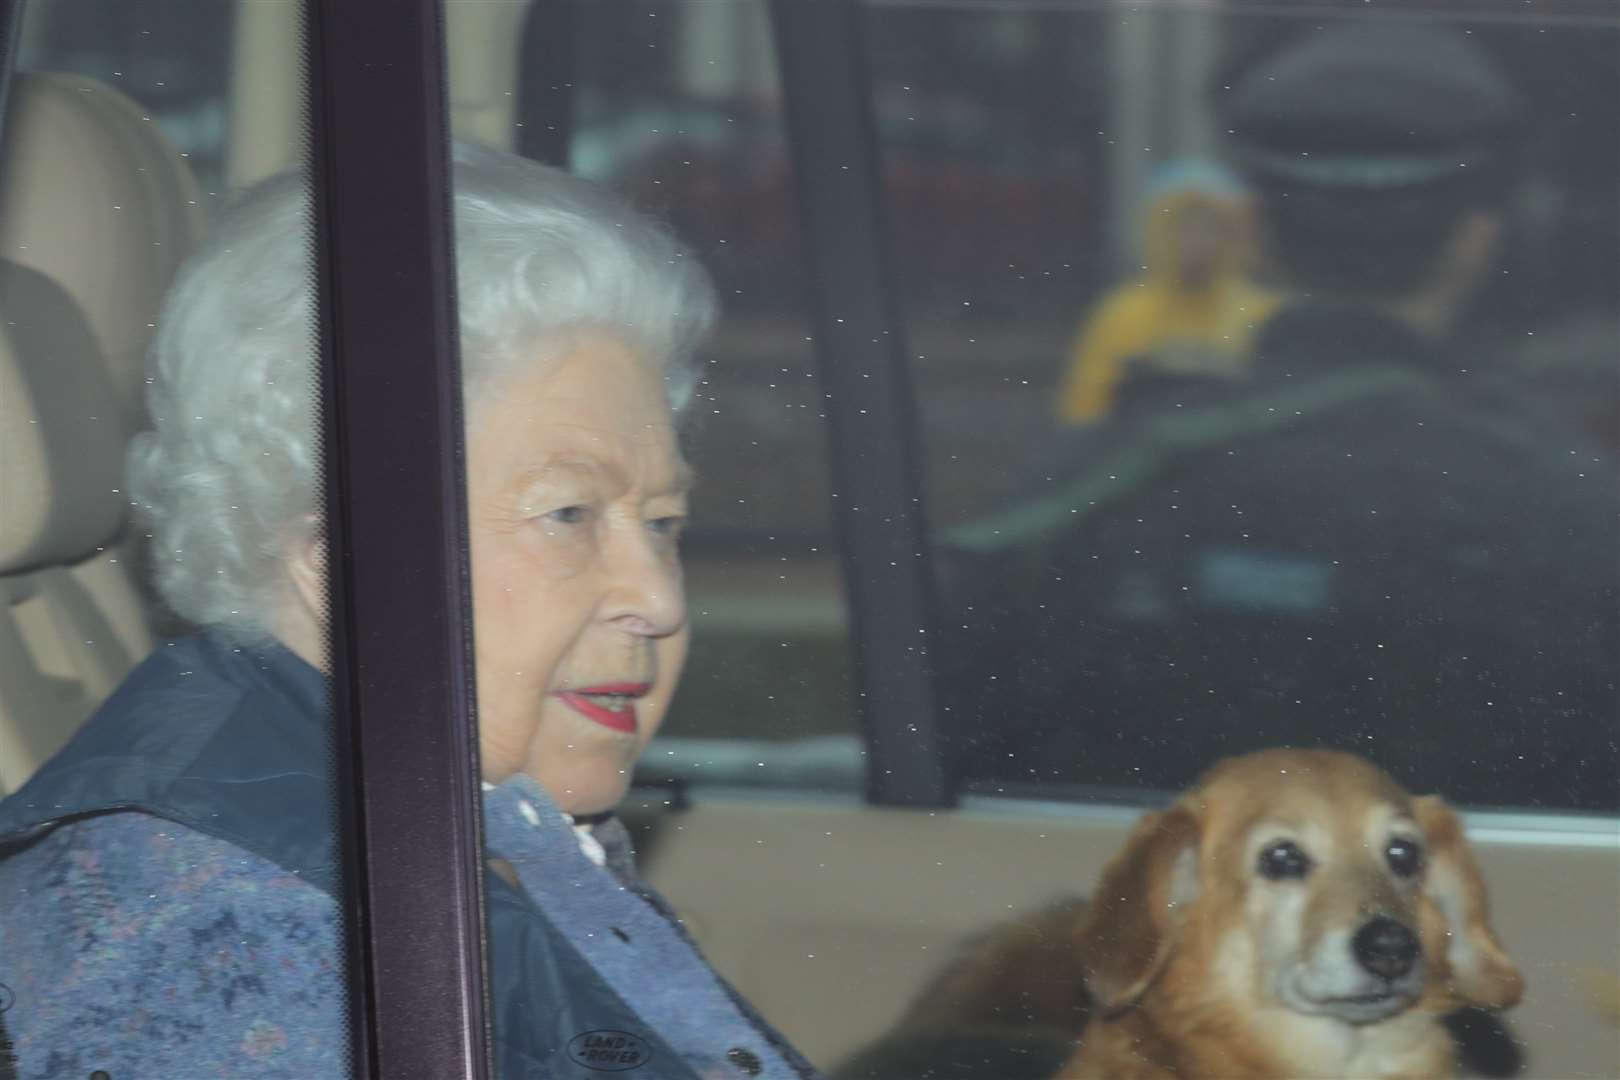 The Queen left Buckingham Palace earlier than normal for her traditional Easter break at Windsor Castle following the virus outbreak (Aaron Chown/PA)